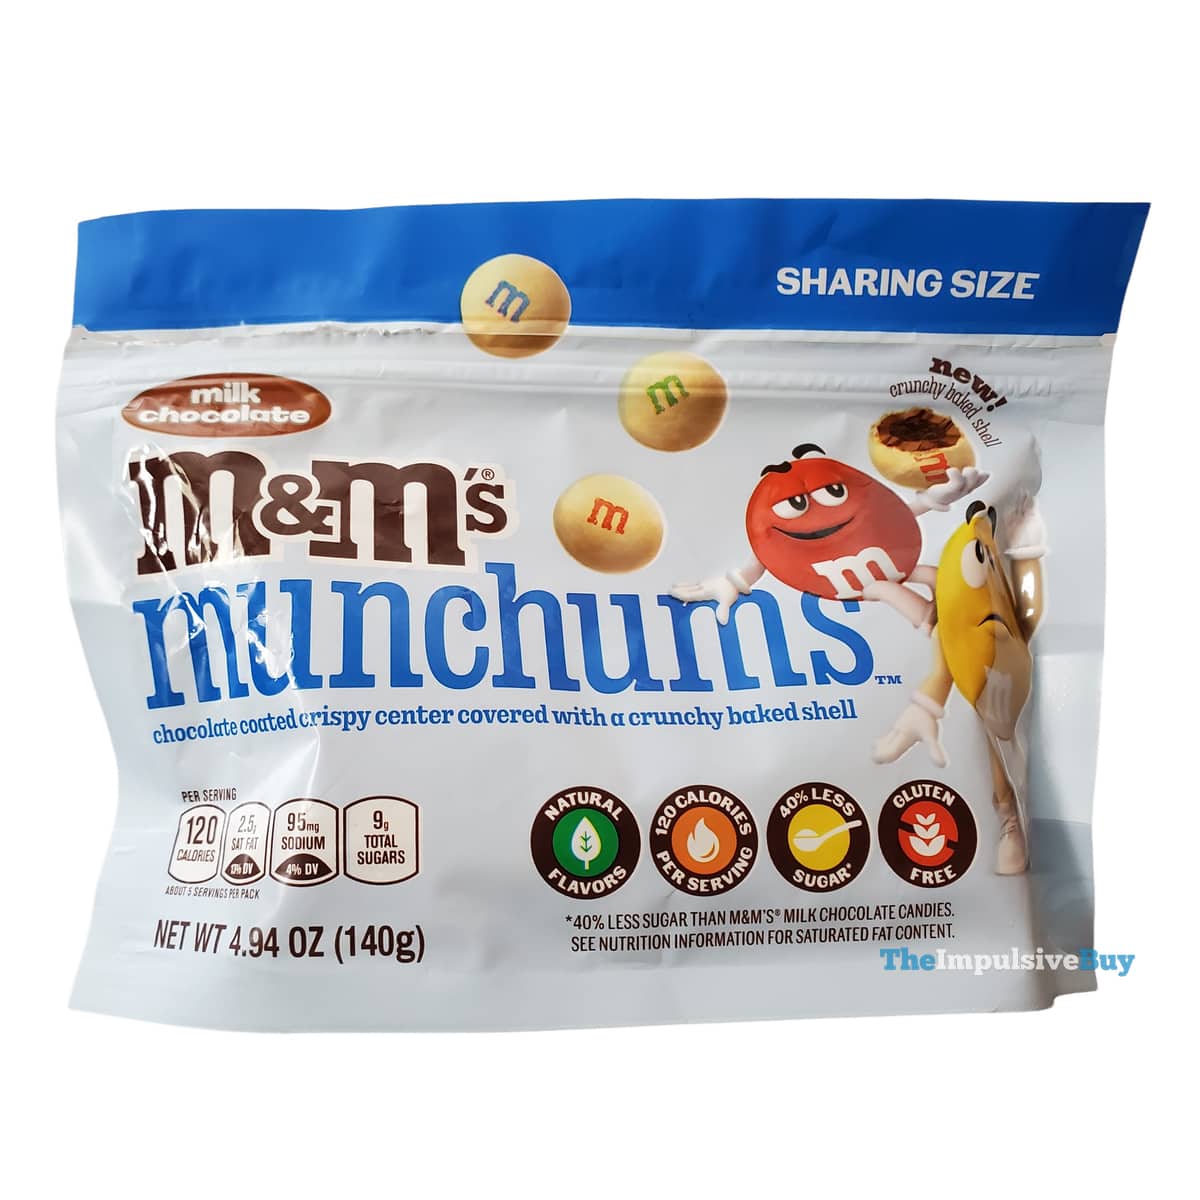 Mars releases limited-edition M&M'S packs